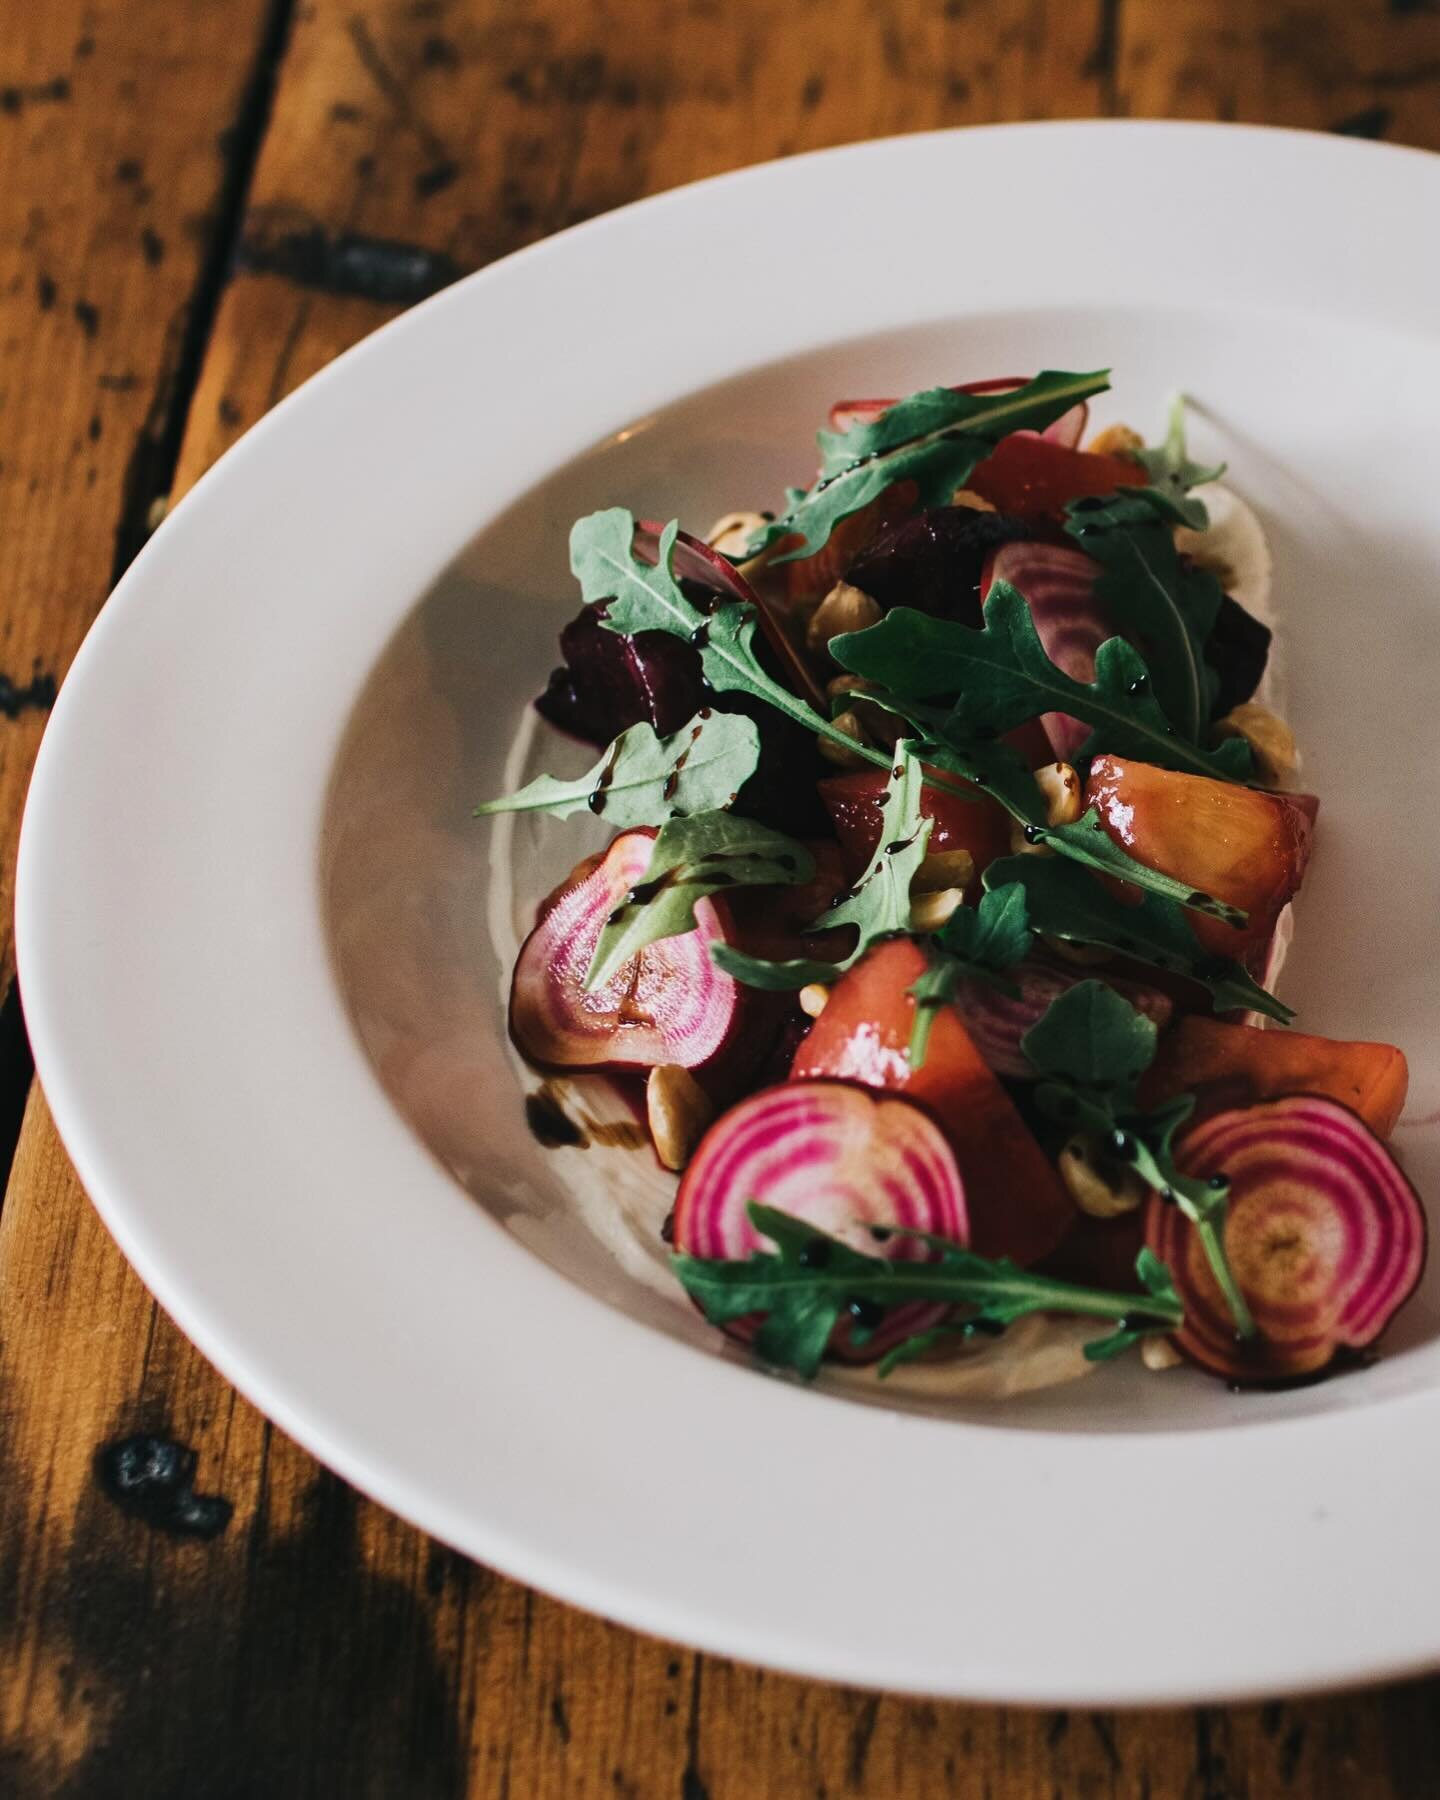 Join us at lunch for a salad of roasted beets, arugula, candied almonds, labneh, and balsamic dressing. 

Pair the tanginess, creaminess, and light sweetness with a glass of Sauvignon Blanc!

#springsalad 
#winepairing